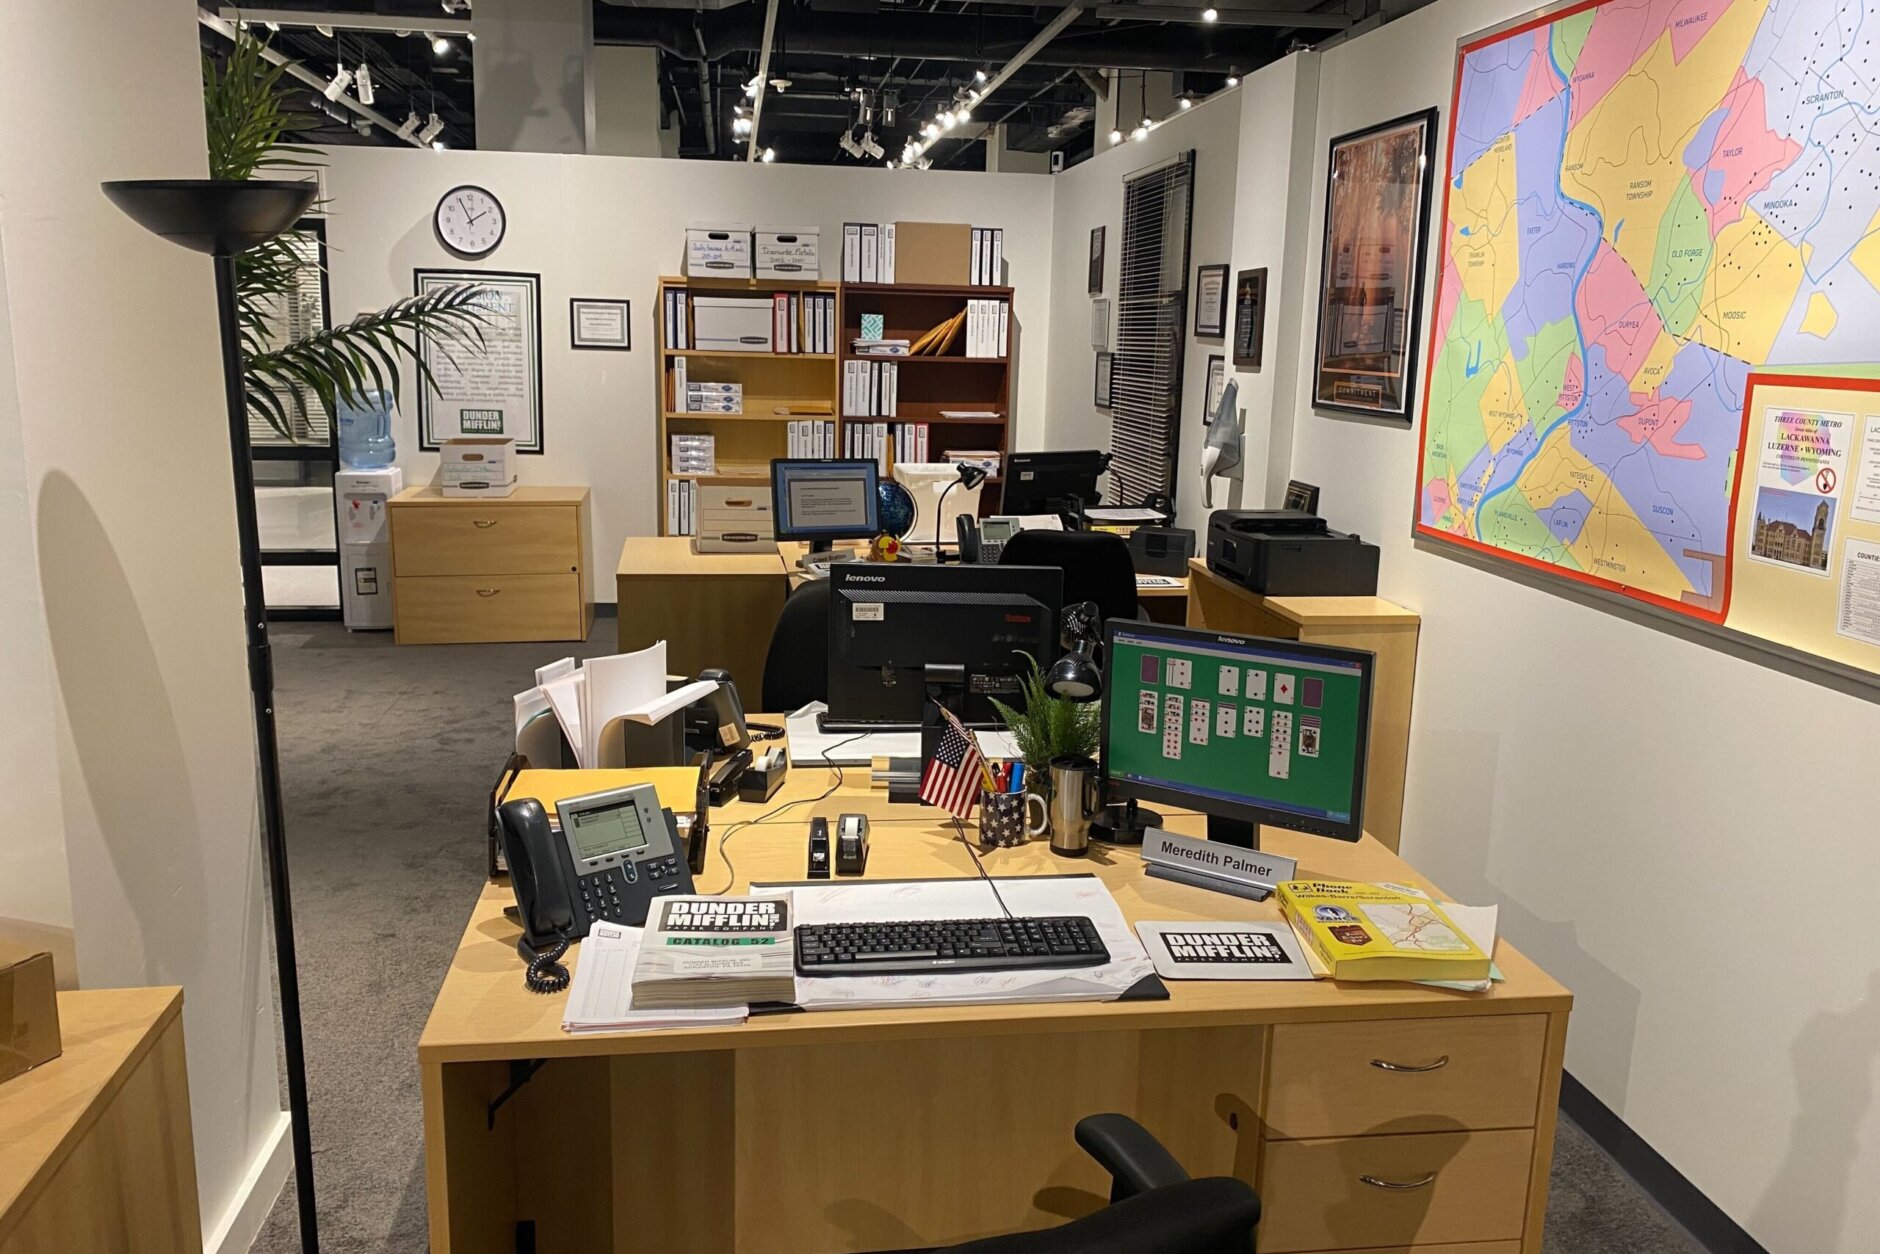 Avid fans of The Office will have the chance to live out the fantasies of working for the mild mannered paper company, Dunder Mifflin, and get plenty of photo ops.